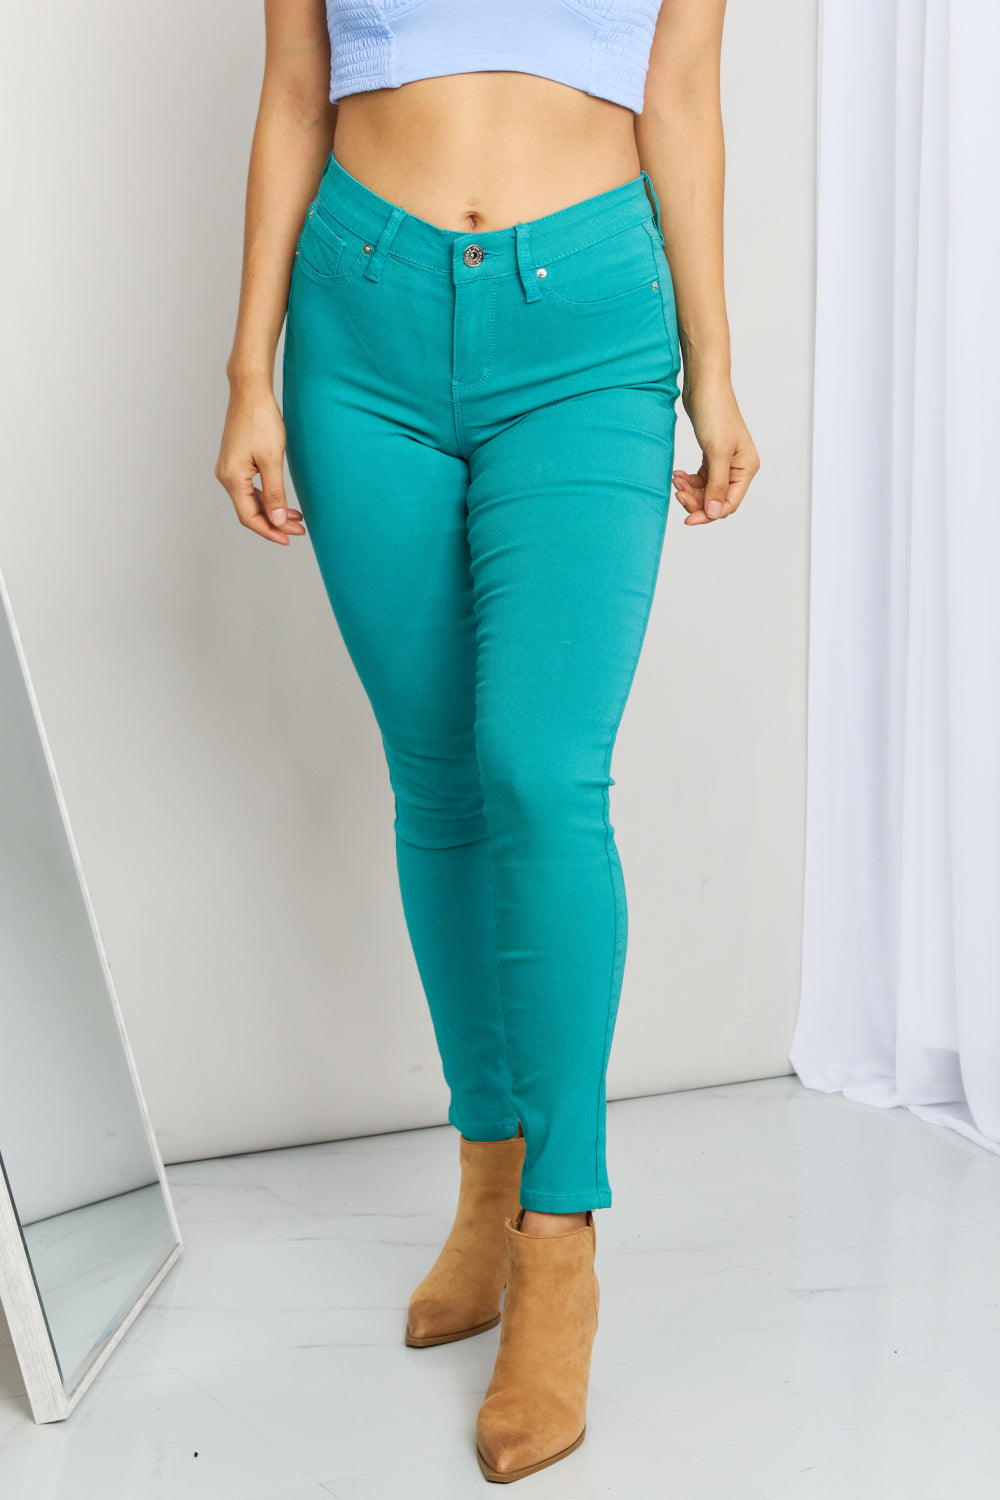 YMI Jeanswear Kate Hyper-Stretch Full Size Mid-Rise Skinny Jeans in Sea Green COCO CRESS